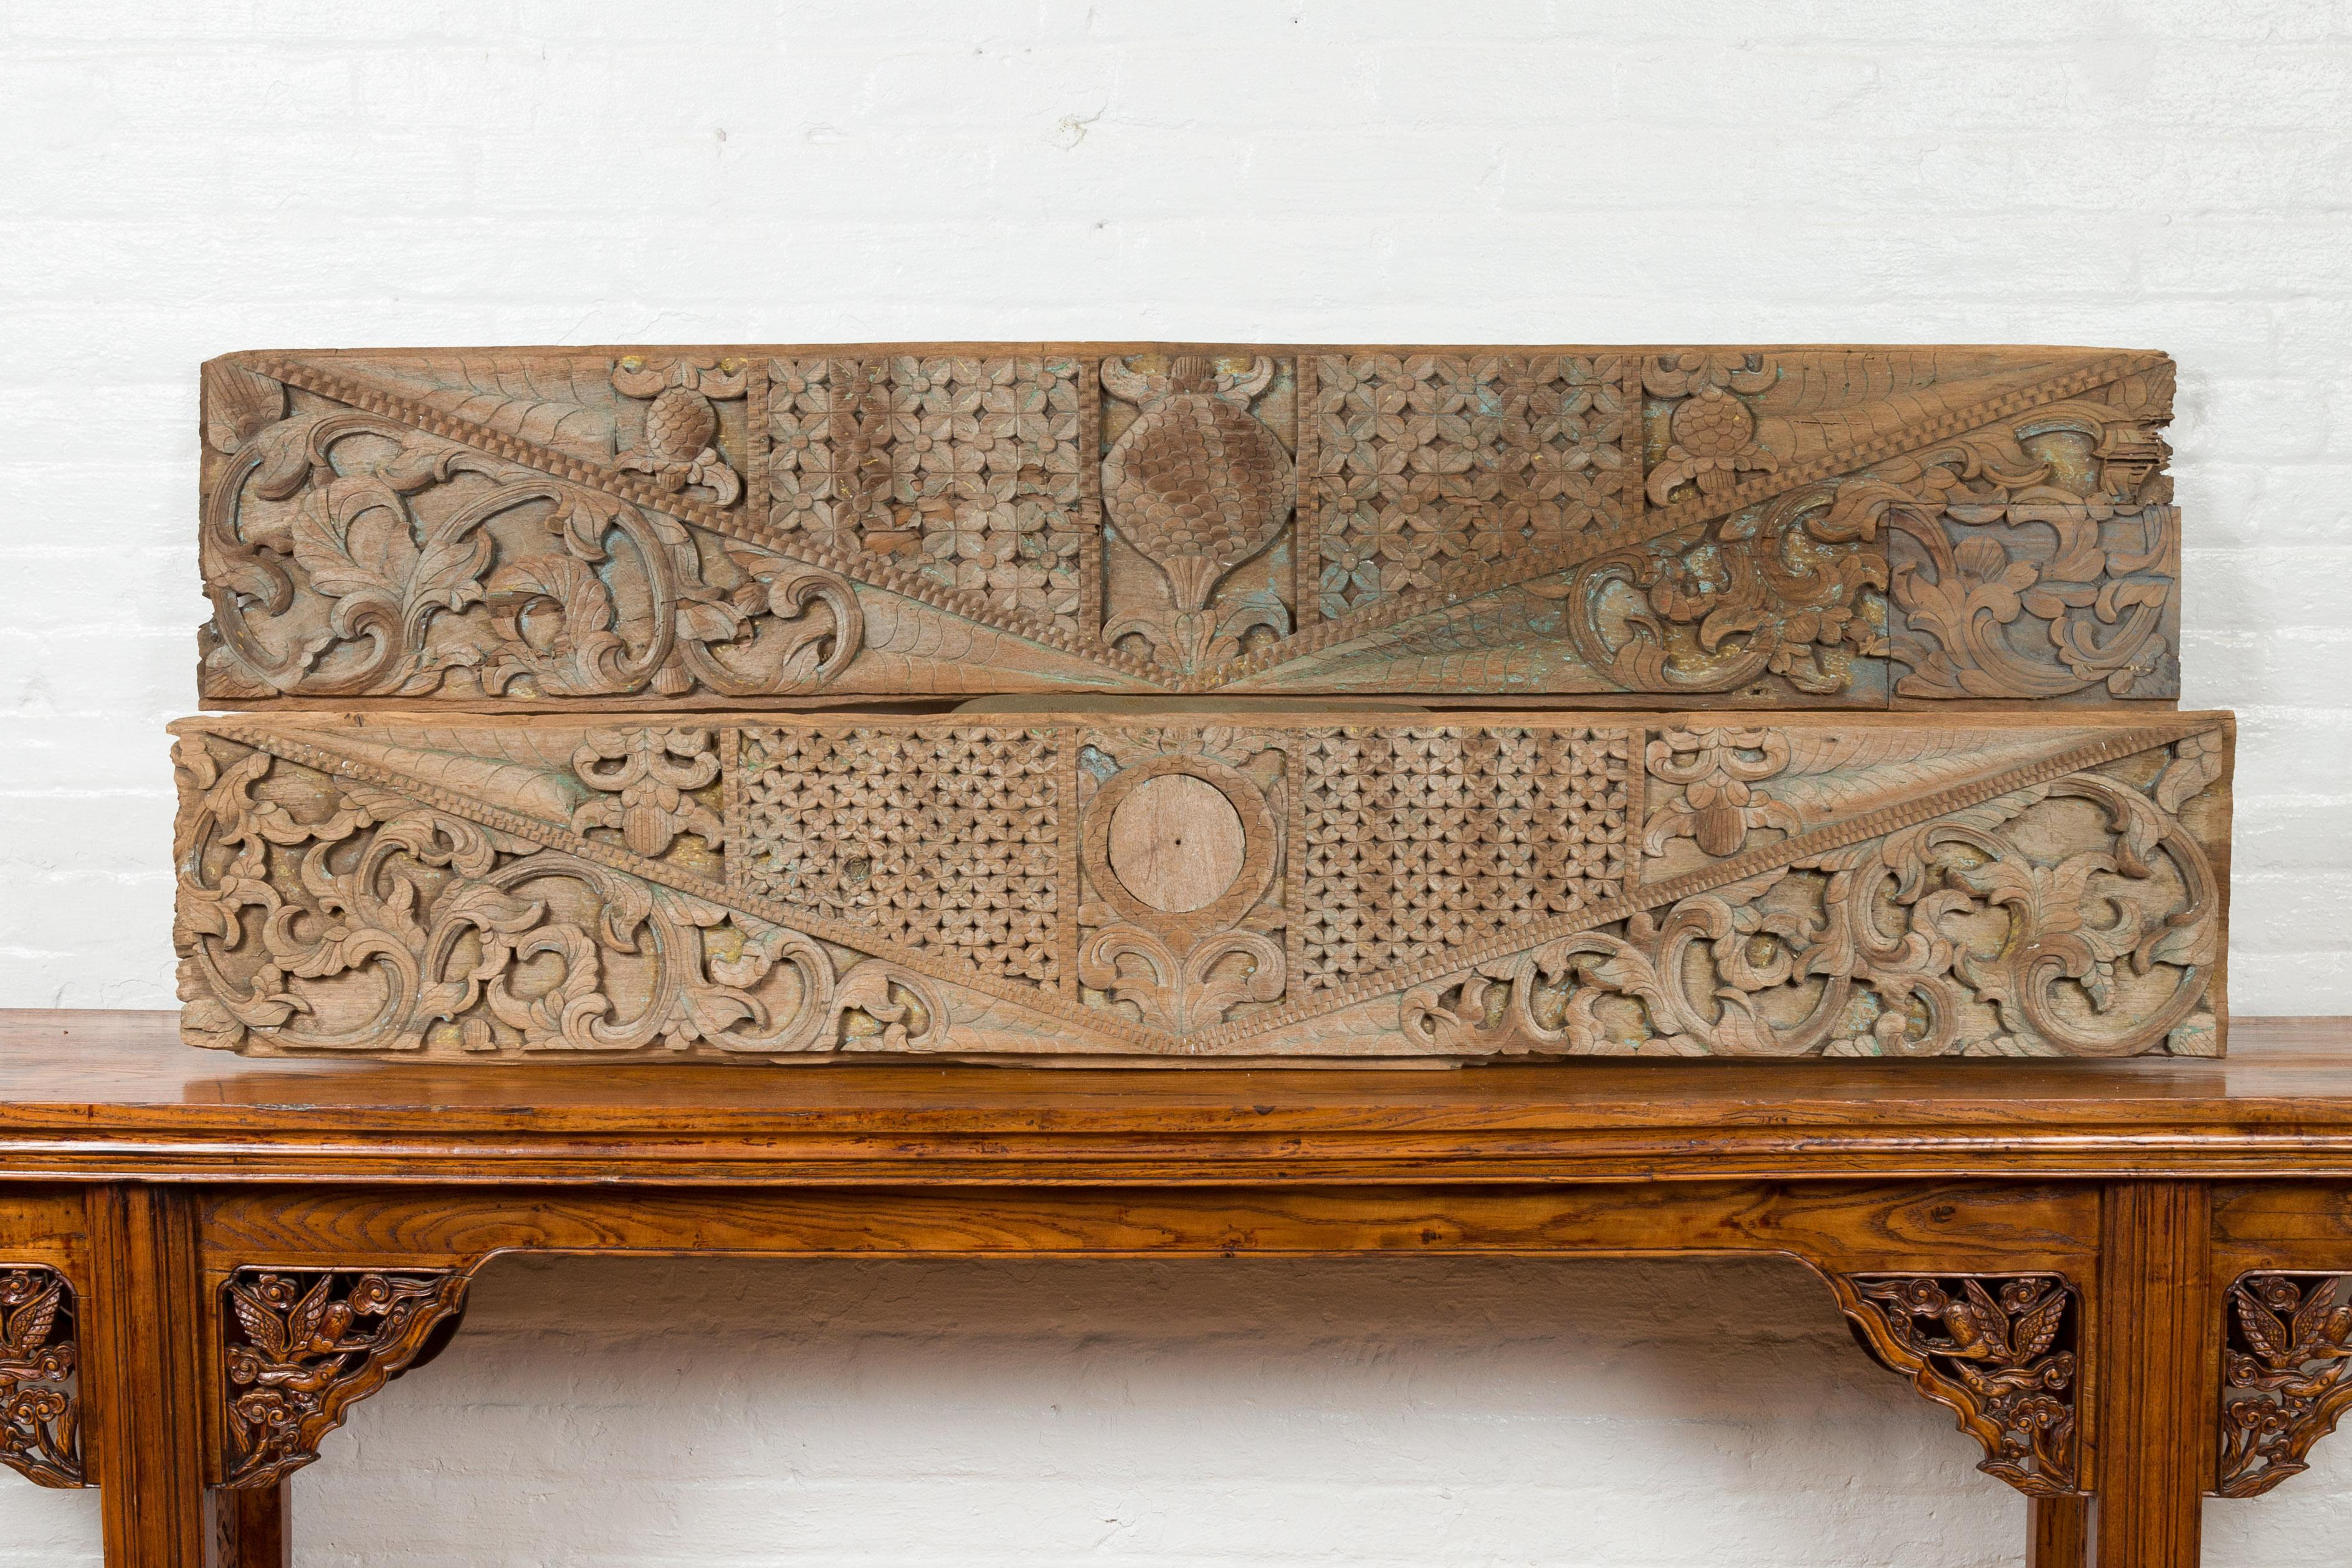 A pair of antique Indonesian carved wood overdoor panels from the 19th century, with traces of original paint. Crafted in Indonesia, each of these horizontal carved panels features geometric motifs surrounding a delicate scrolling foliage, accented